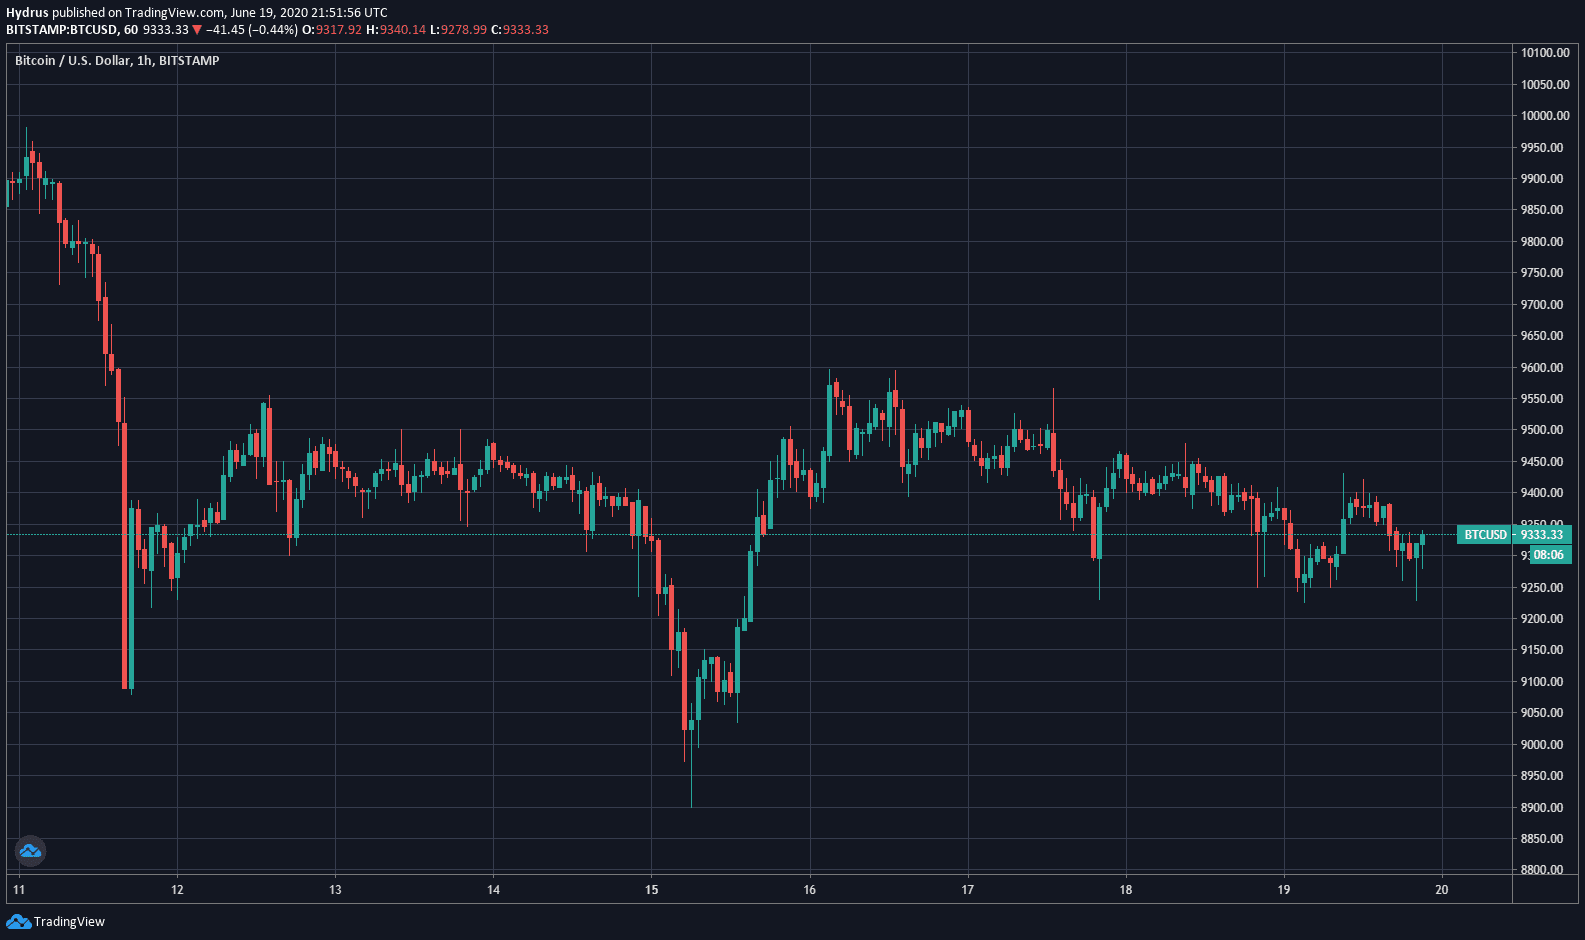 Bitcoin price chart over the past week by TradingView.com